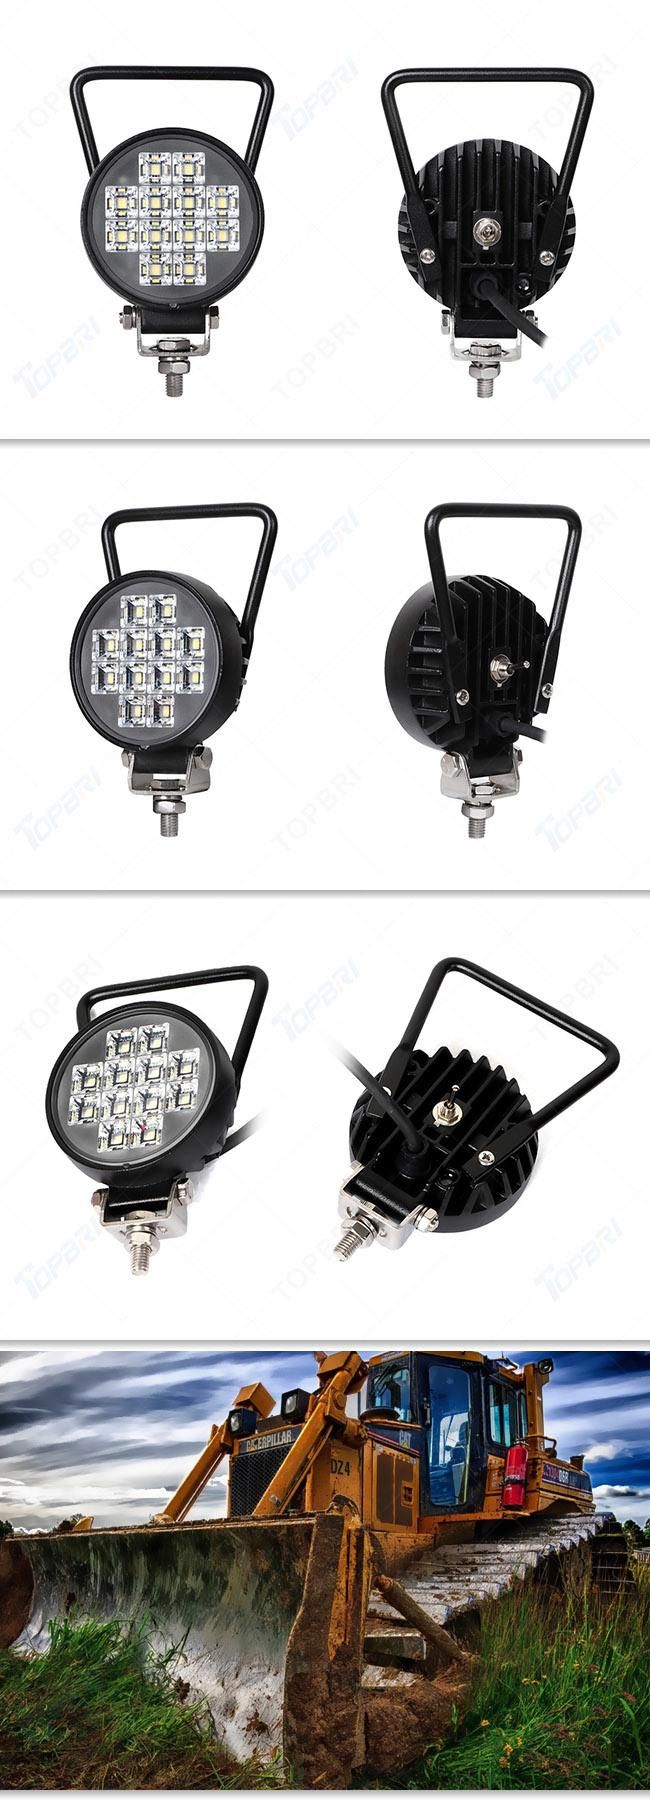 4X4 Offroad LED Work Motorcycle Lamp Military Driving Caravan Light Duty Truck Trailers